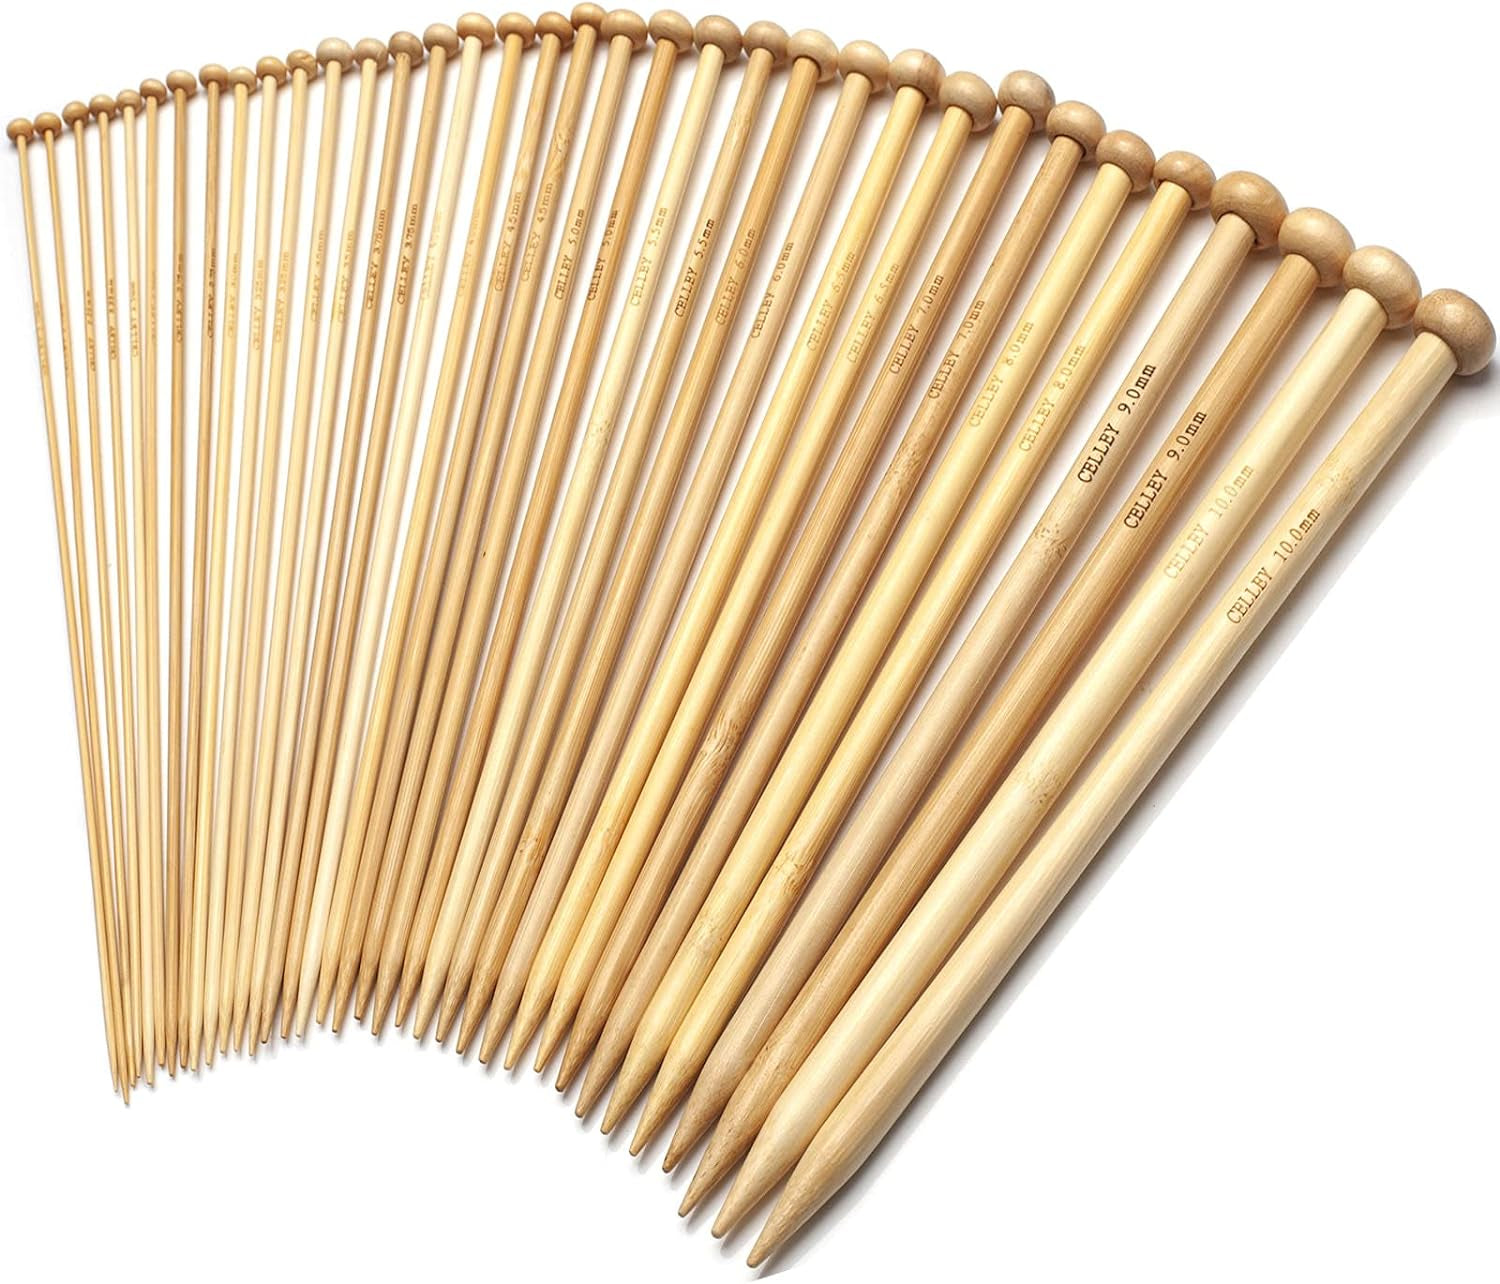 14 Inch Single Point Bamboo Knitting Needles Set for Beginners, 18 Pairs US Size 0-15 (2.0-10.0Mm) Straight Wooden Knitting Needles, Long Wood Needles Prefect for Sweaters, Socks, Shawl and Scarf